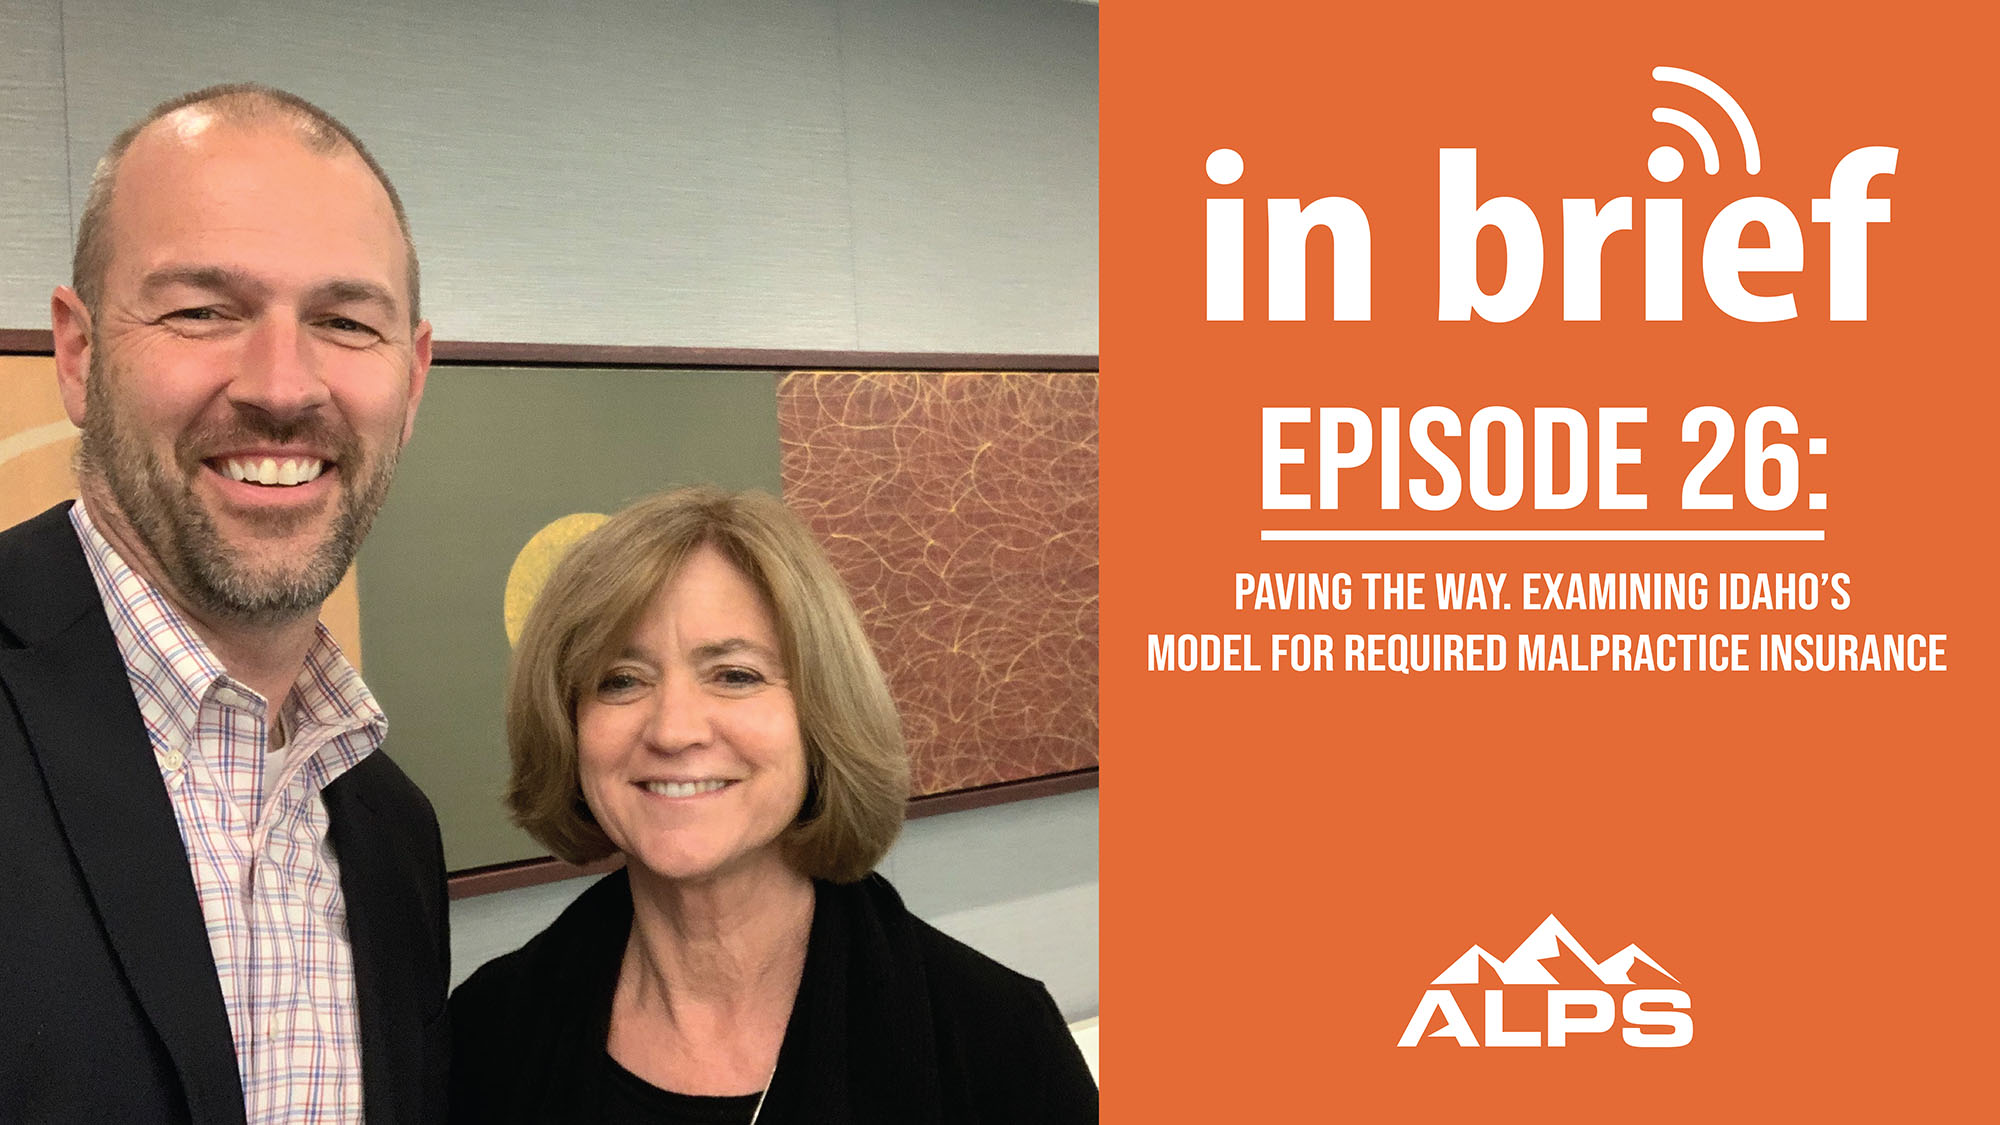 ALPS In Brief Podcast - Episode 26: Paving the Way. Examining Idaho’s Model for Required Malpractice Insurance